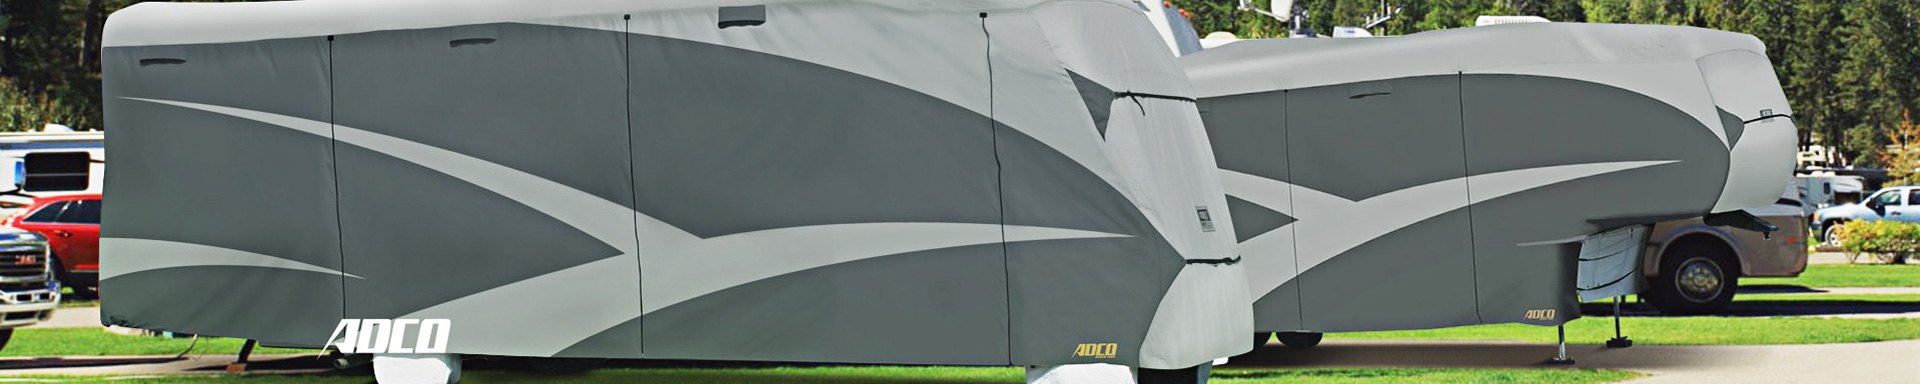 ADCO RV Covers